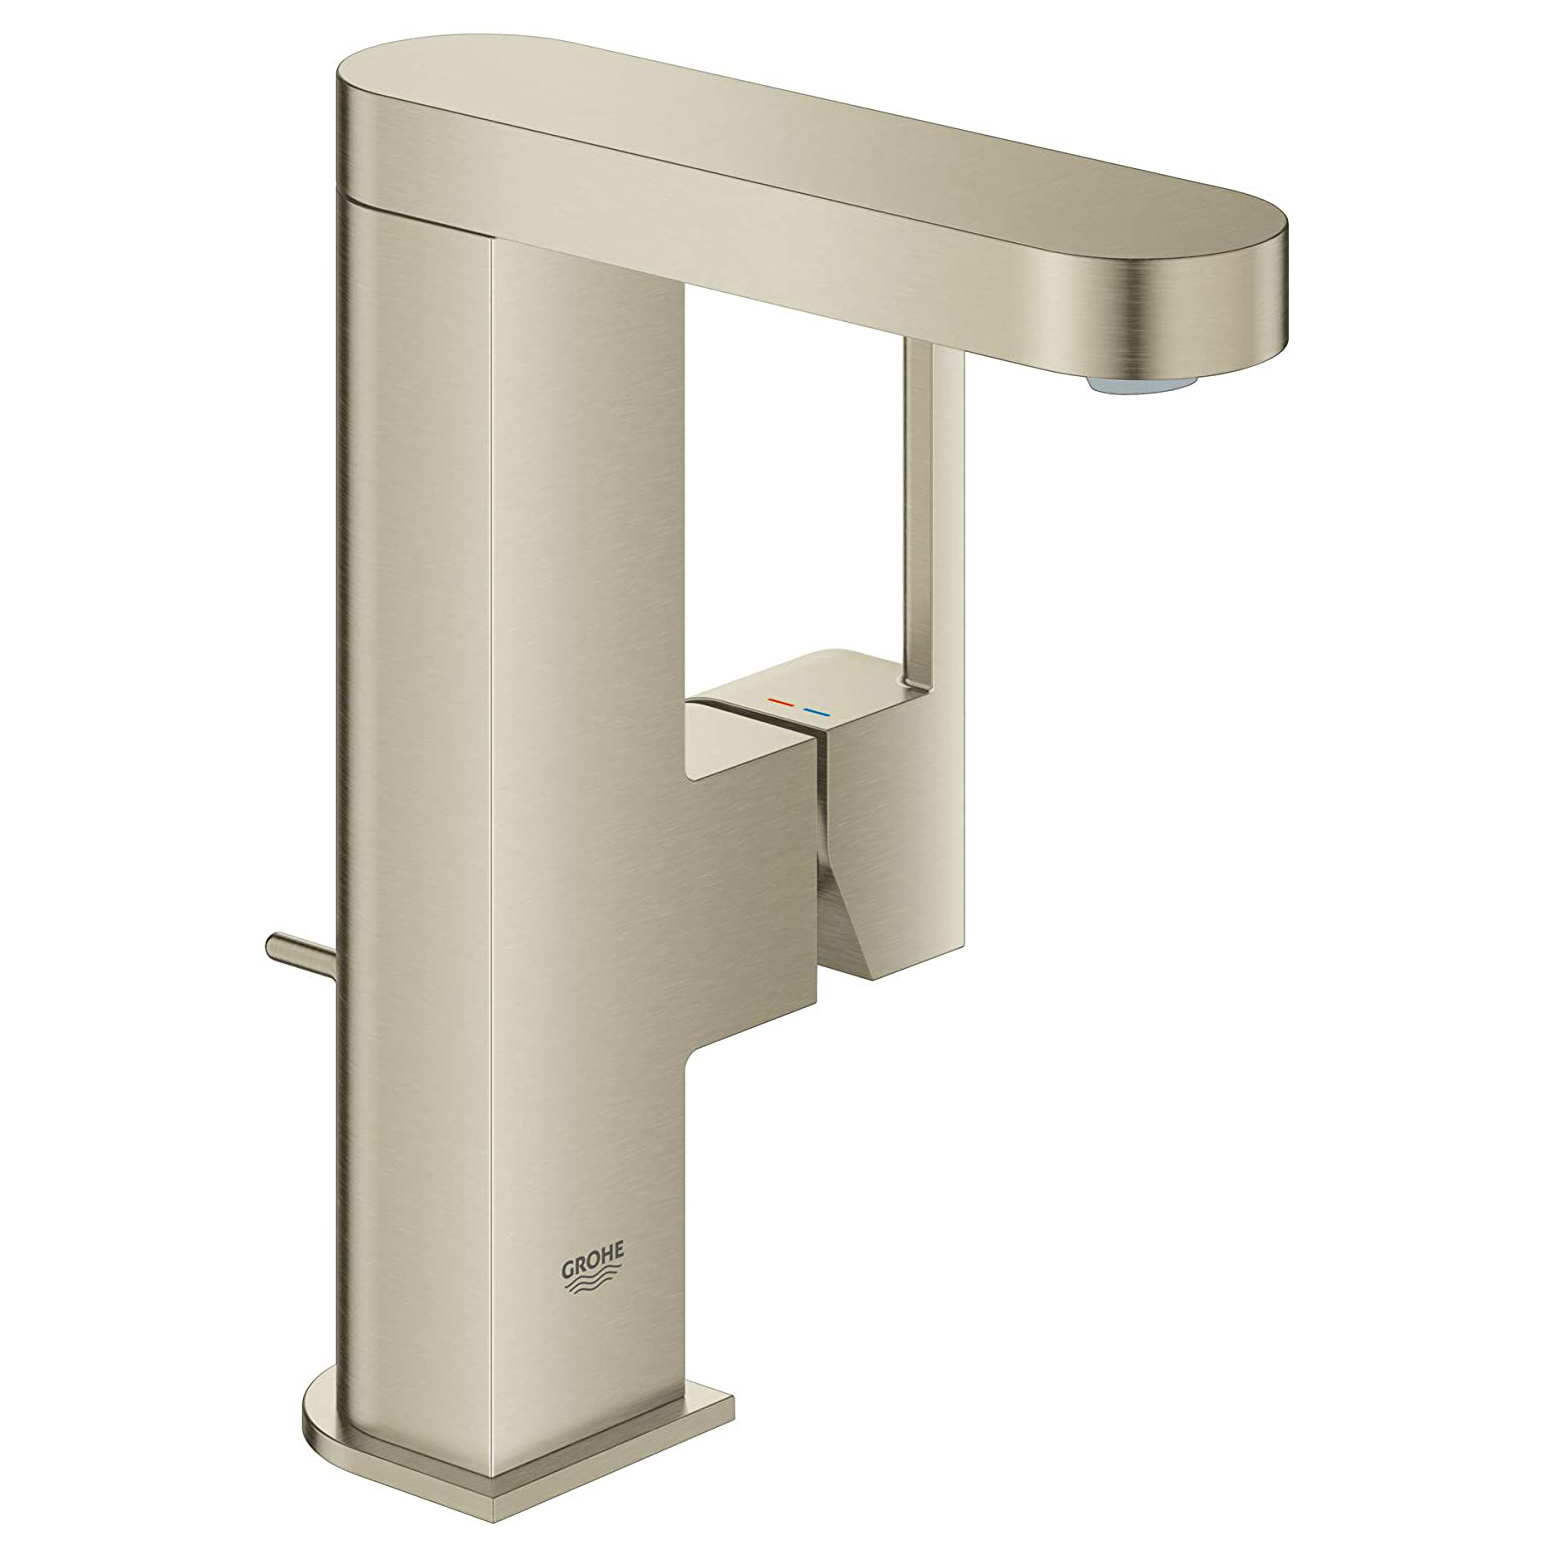 Plus Single Hole Lav Faucet in Brushed Nickel 1.2 gpm